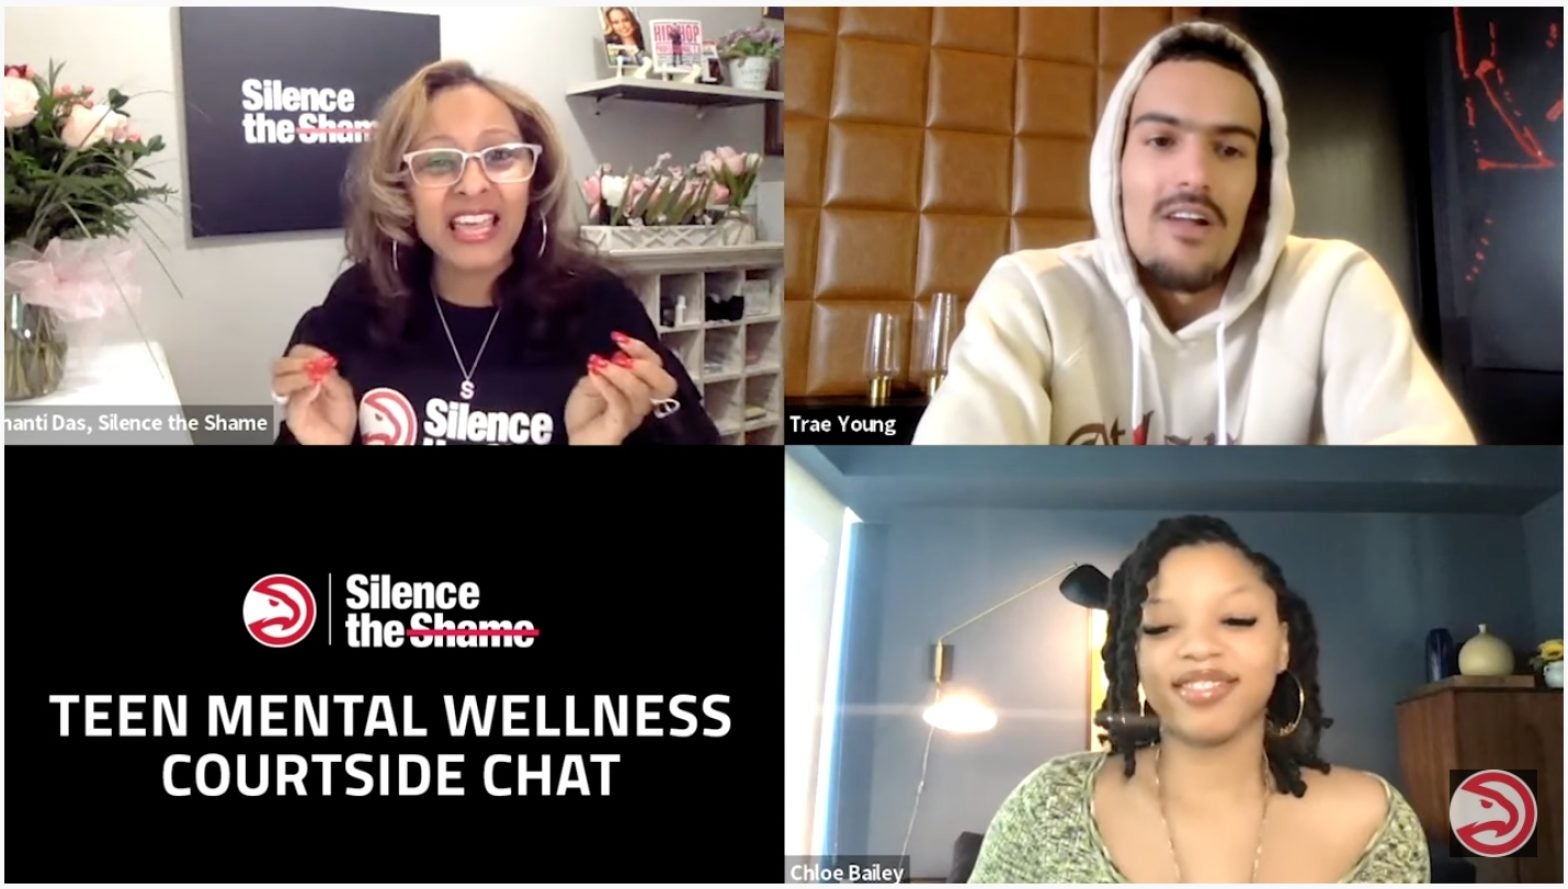 “Words Do Hurt”: Chloe Bailey and Trae Young Discuss Social Media And Mental Health